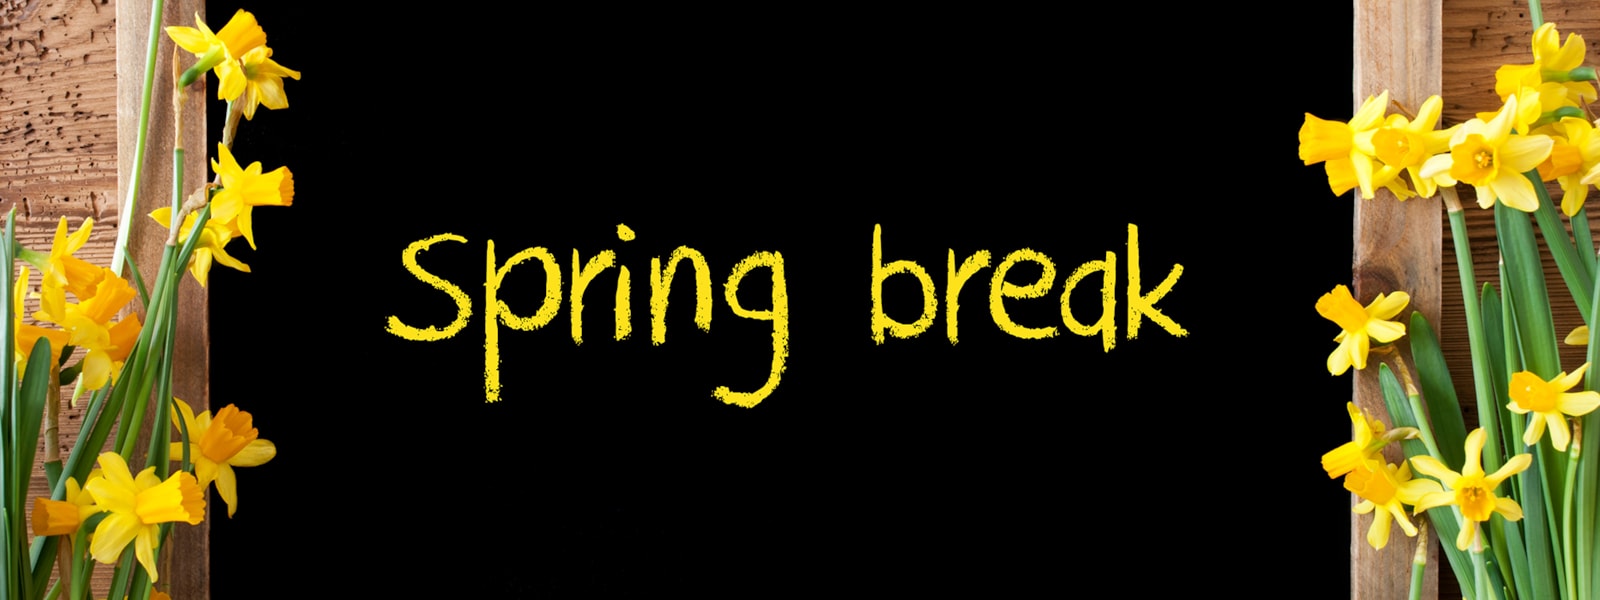 Spring Break, March 18th to March 22nd, No School